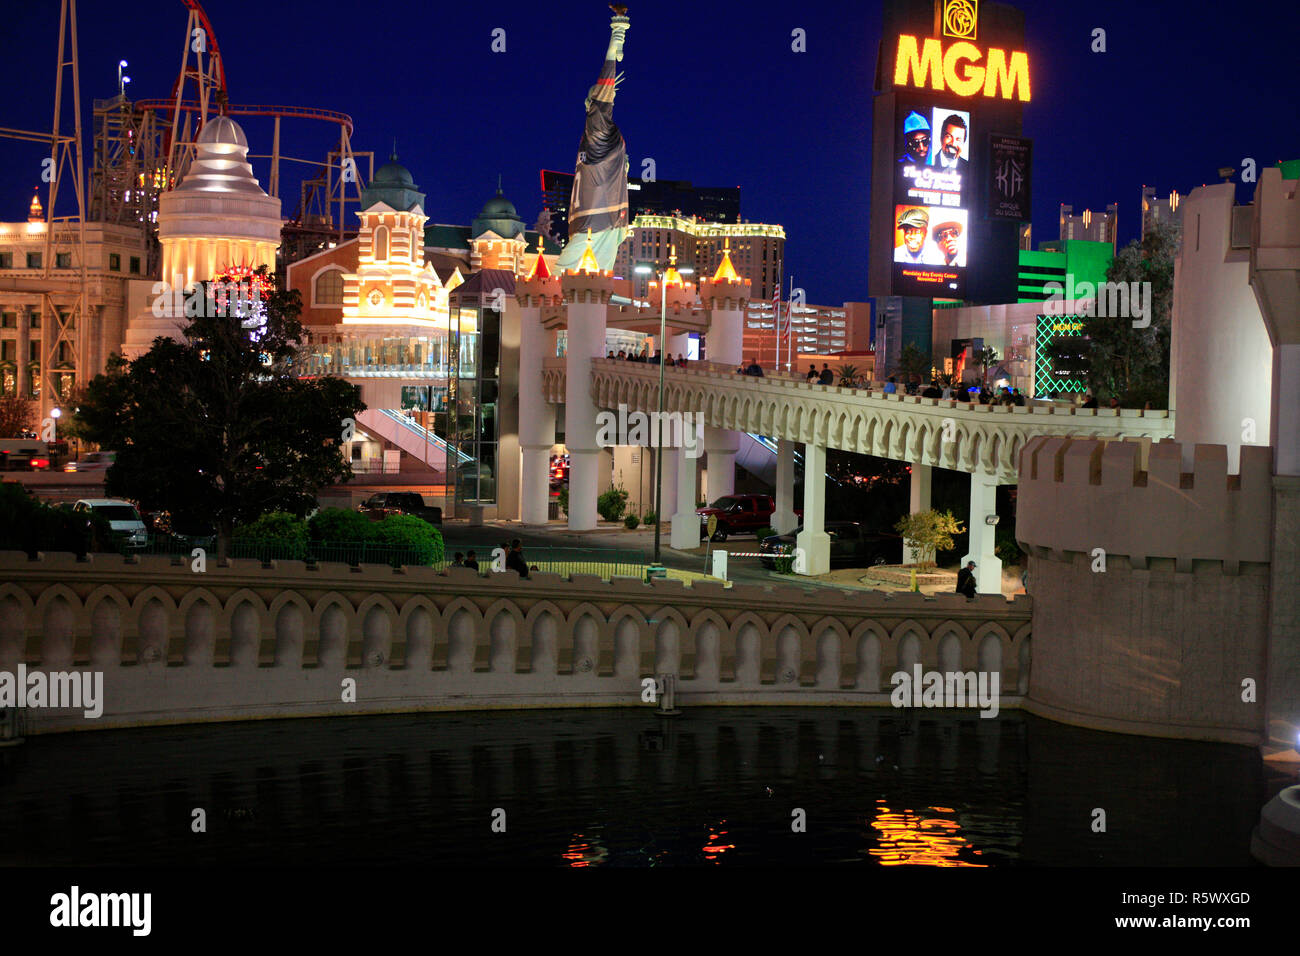 MGM Grand hotel and New York New York from the Excalibur hotel at night in Las Vegas, Nevada Stock Photo